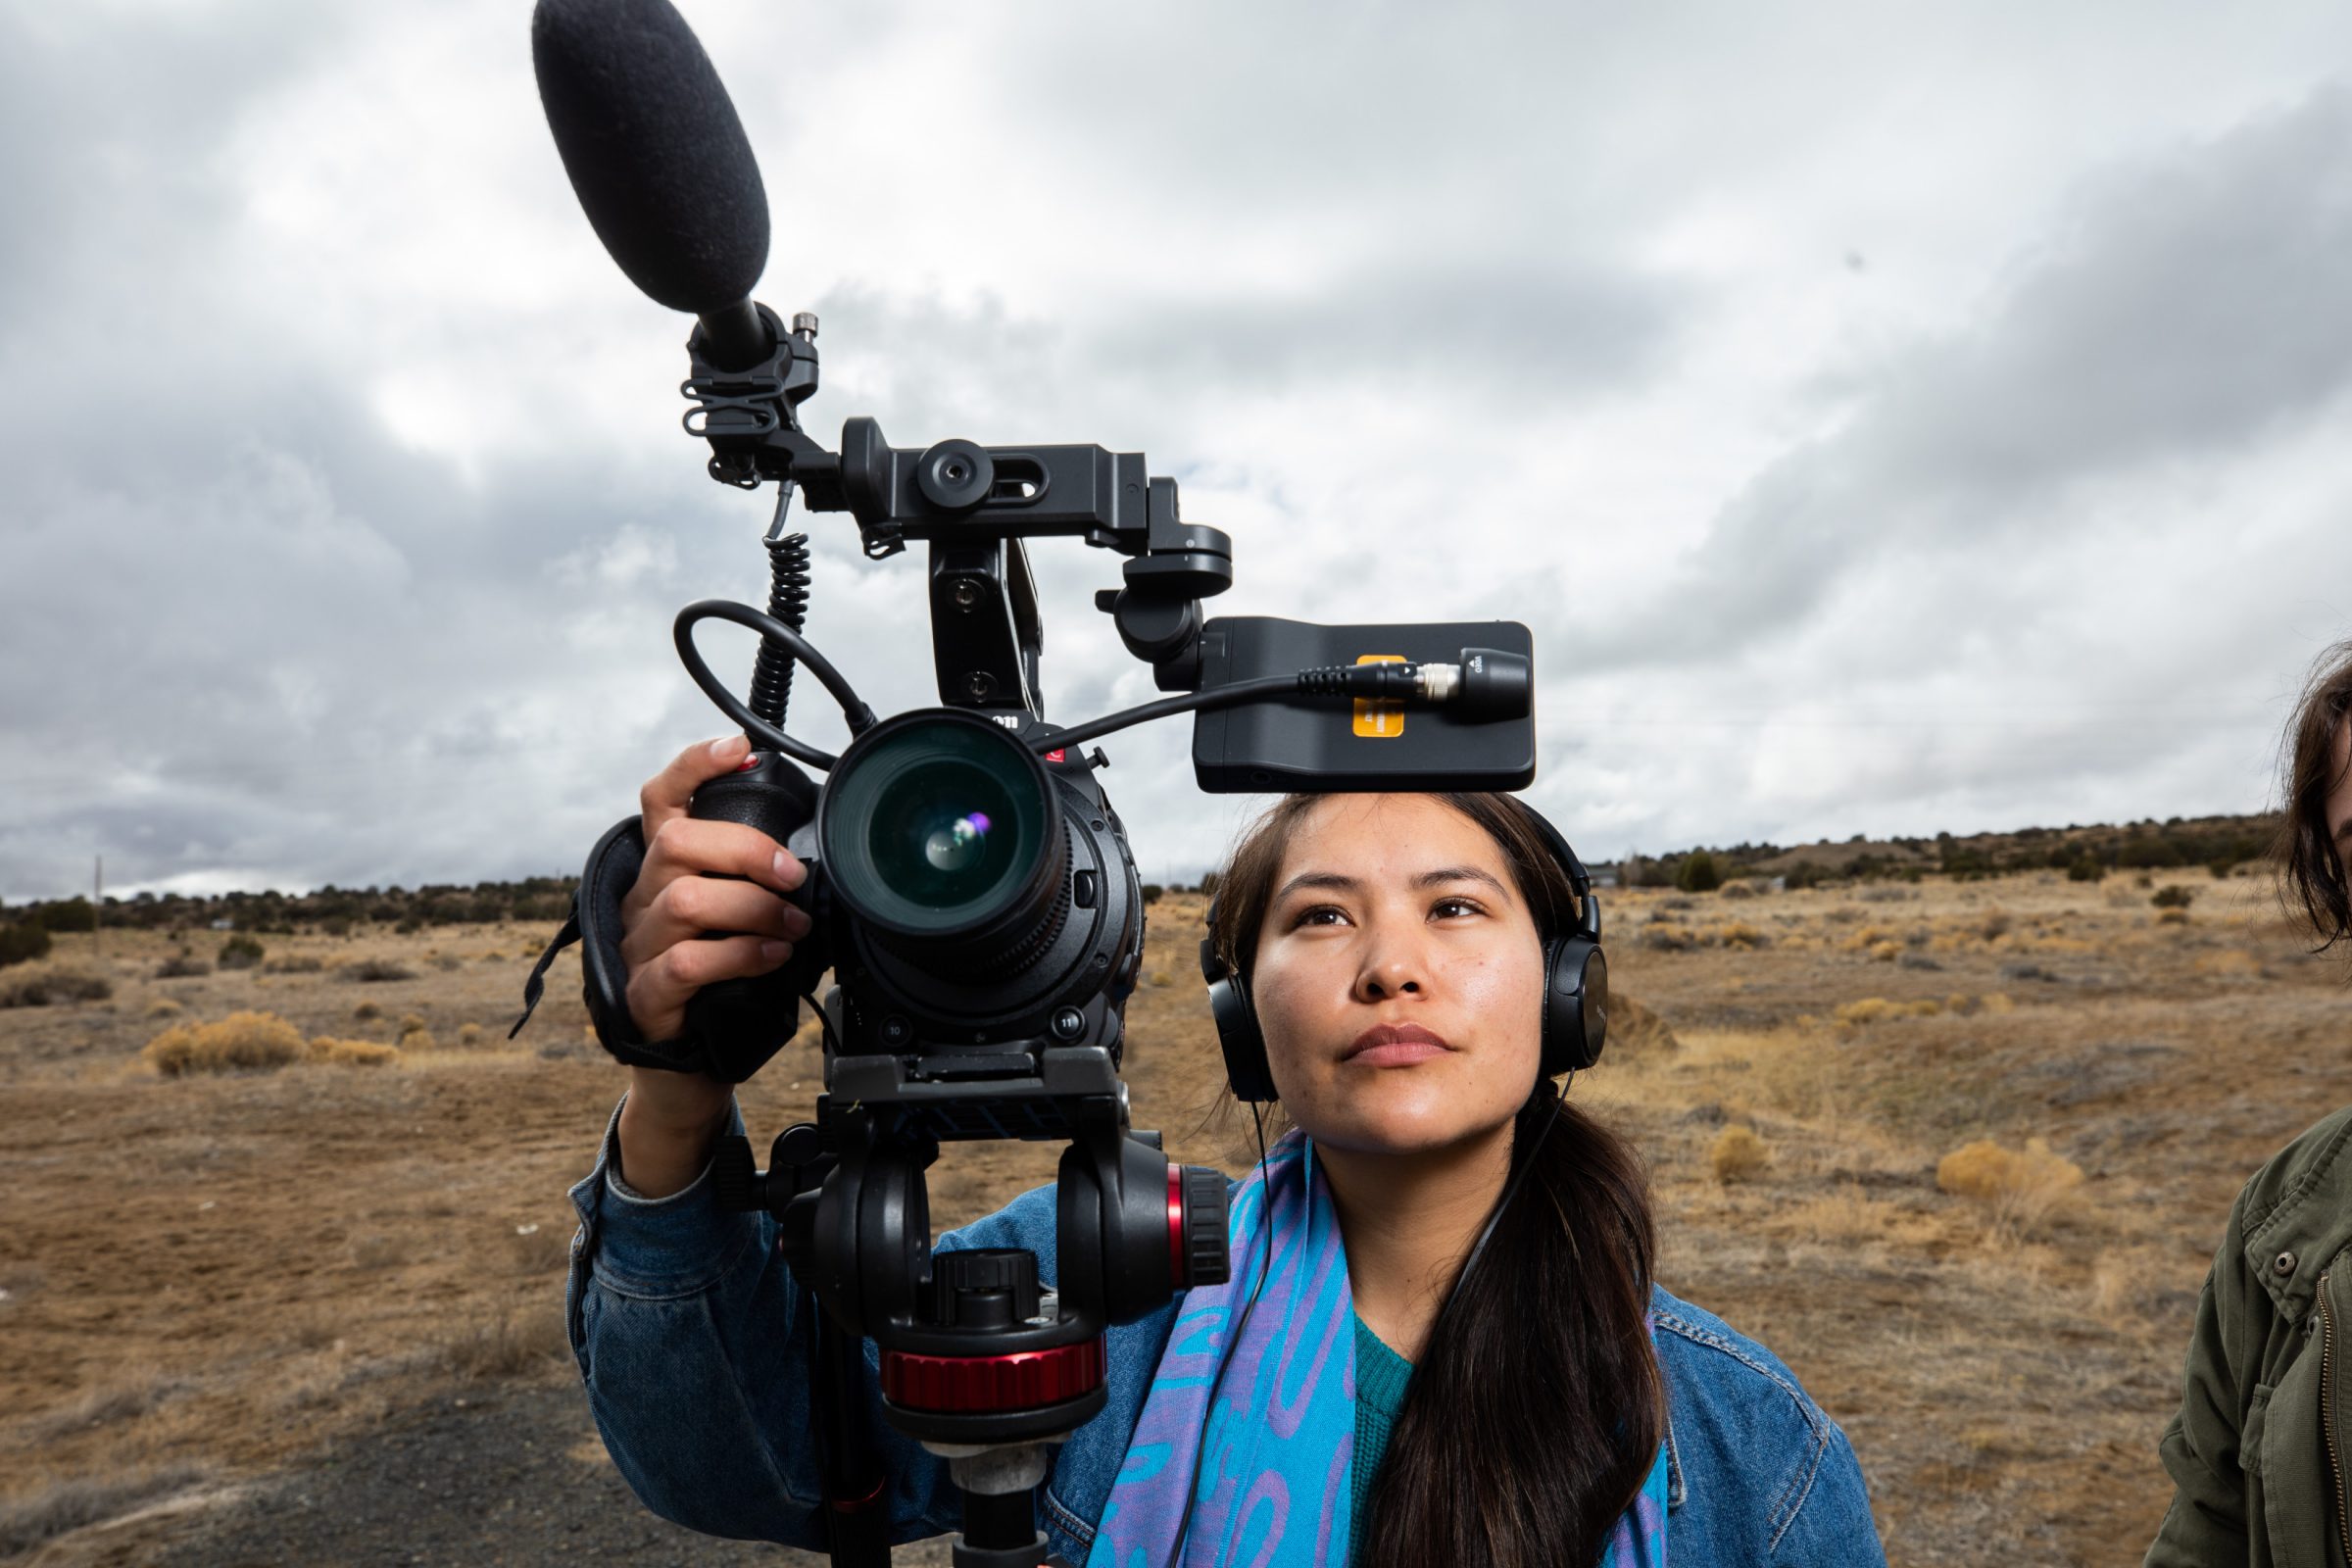 Tinia Witherspoon is standing in the desert and holding a filmmaking camera